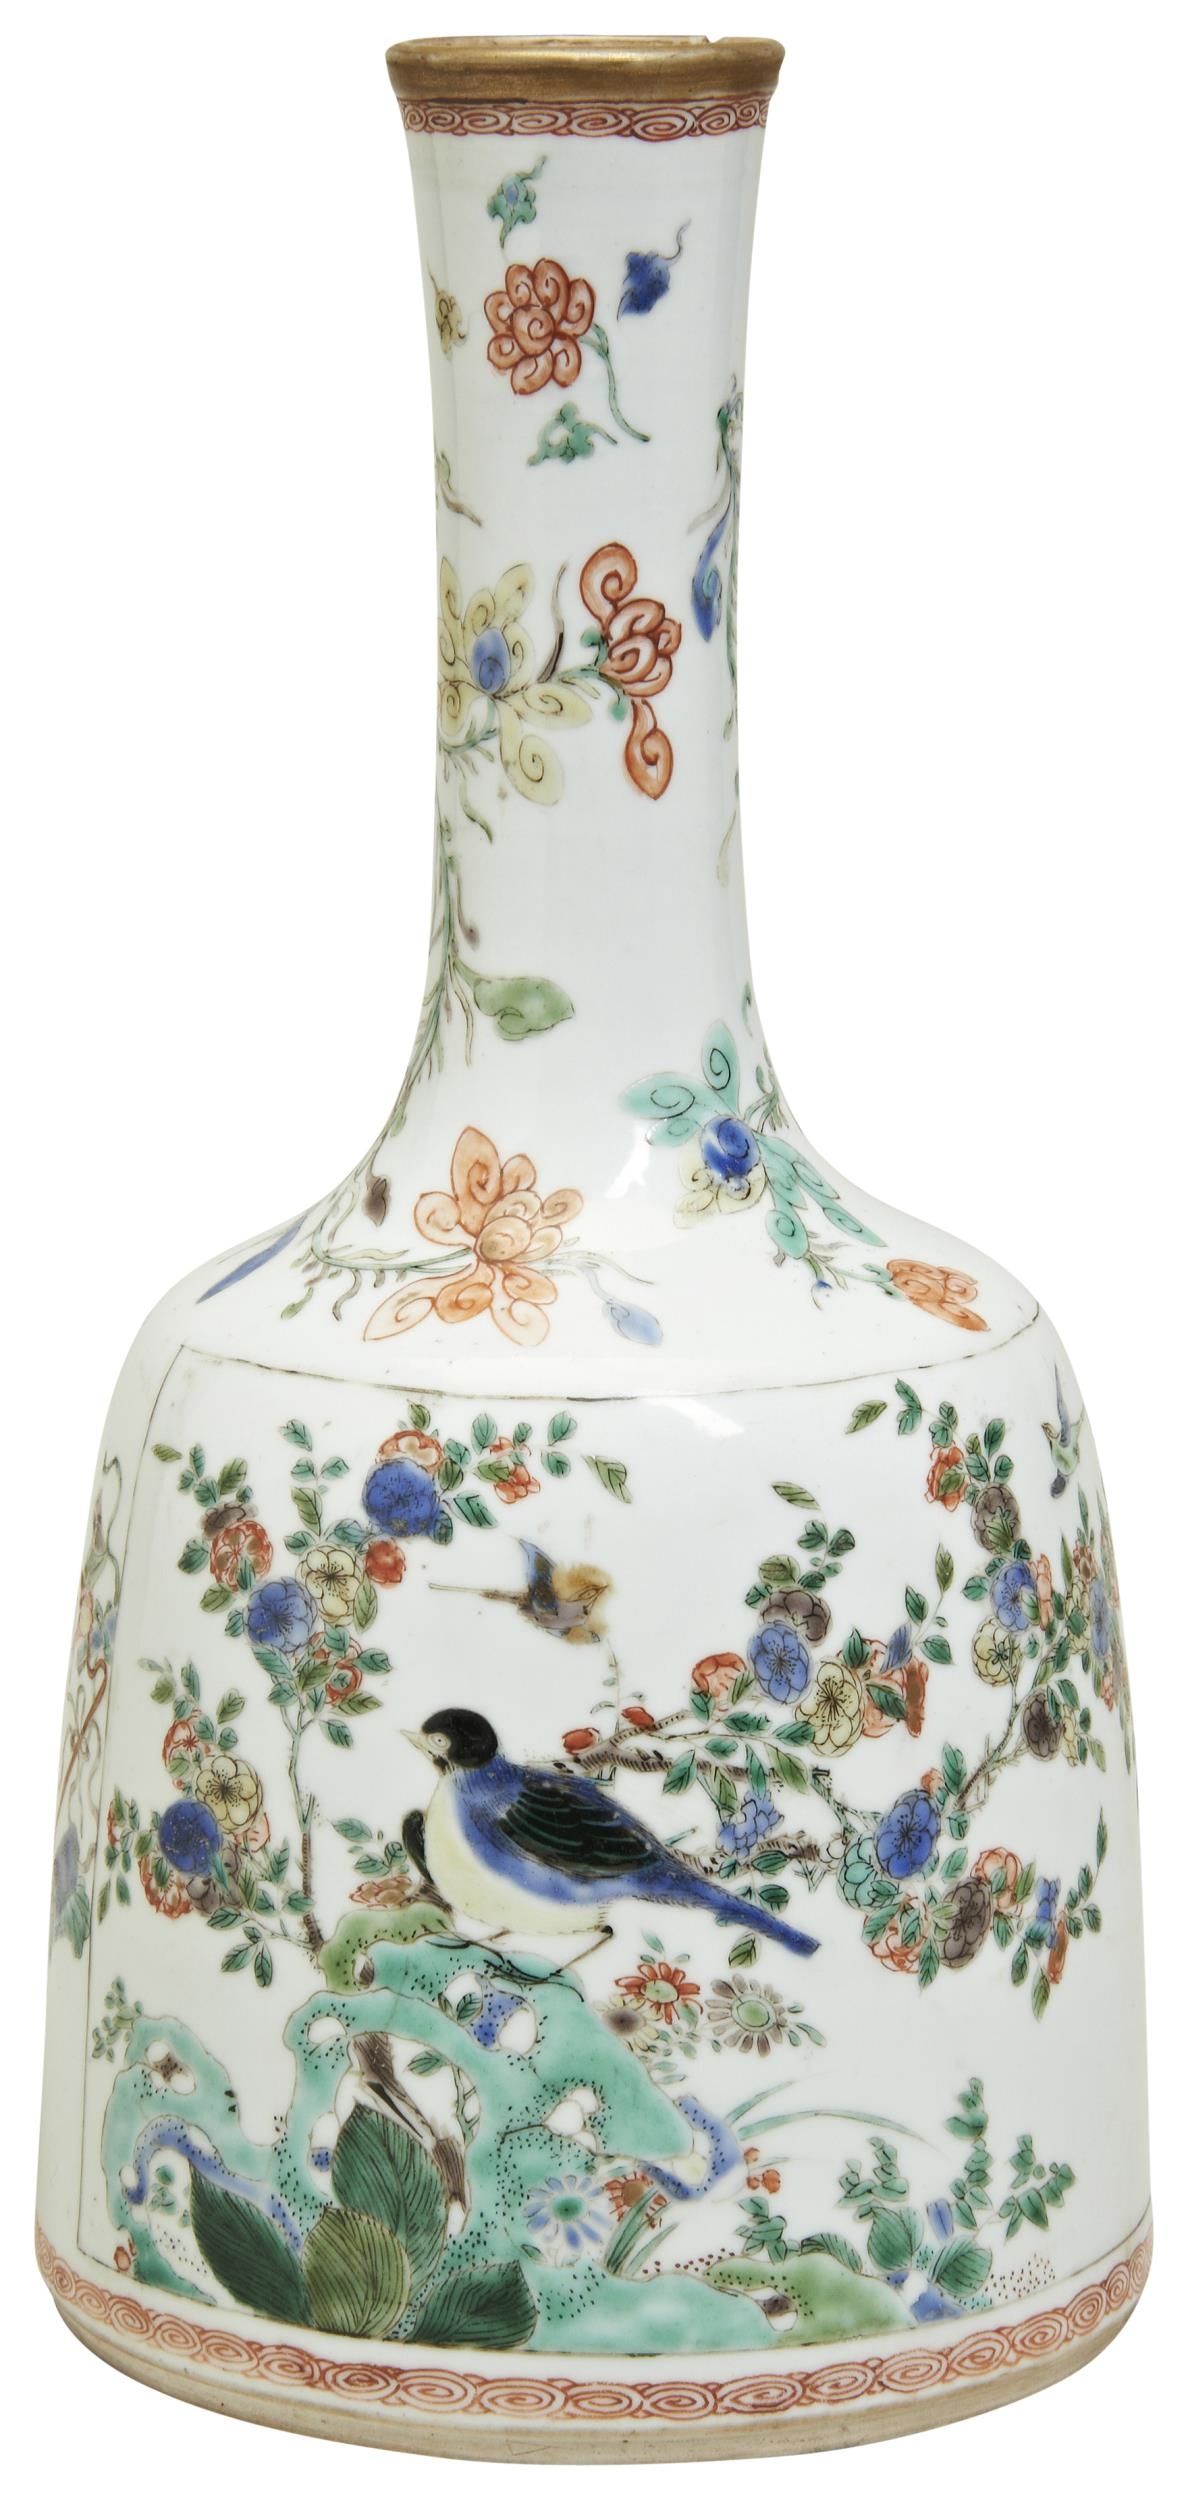 A RARE FAMILLE VERTE 'MALLET' VASE KANGXI PERIOD (1662-1722) the shaped sides painted with two